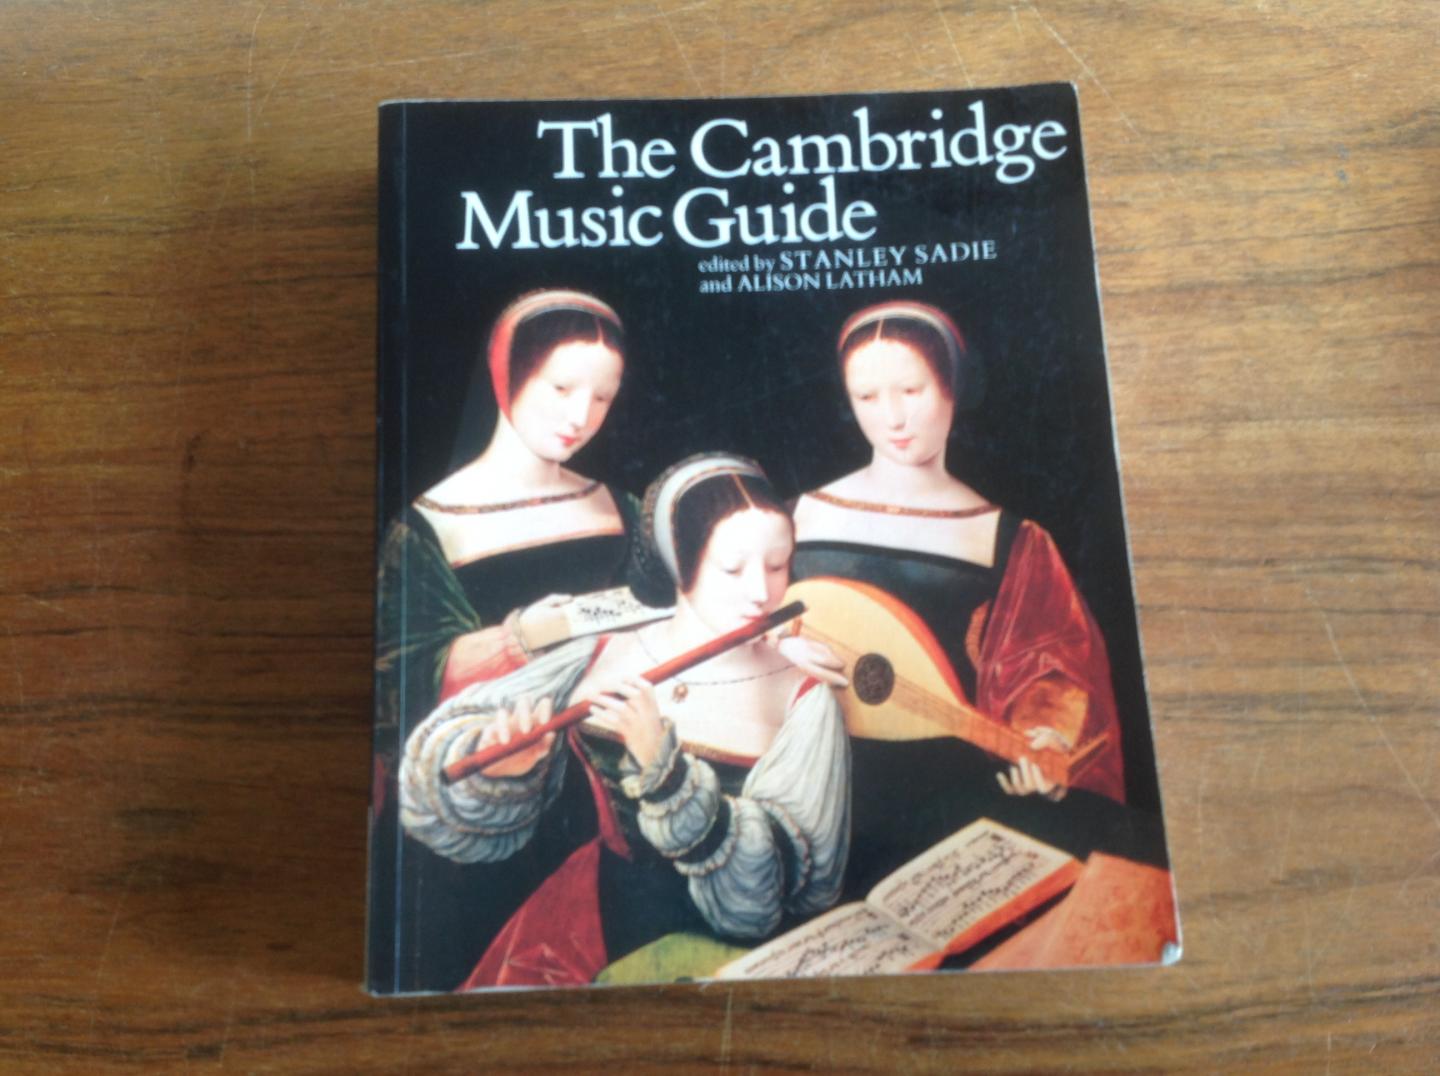 Stanley Sadie - The Cambridge Music Guide